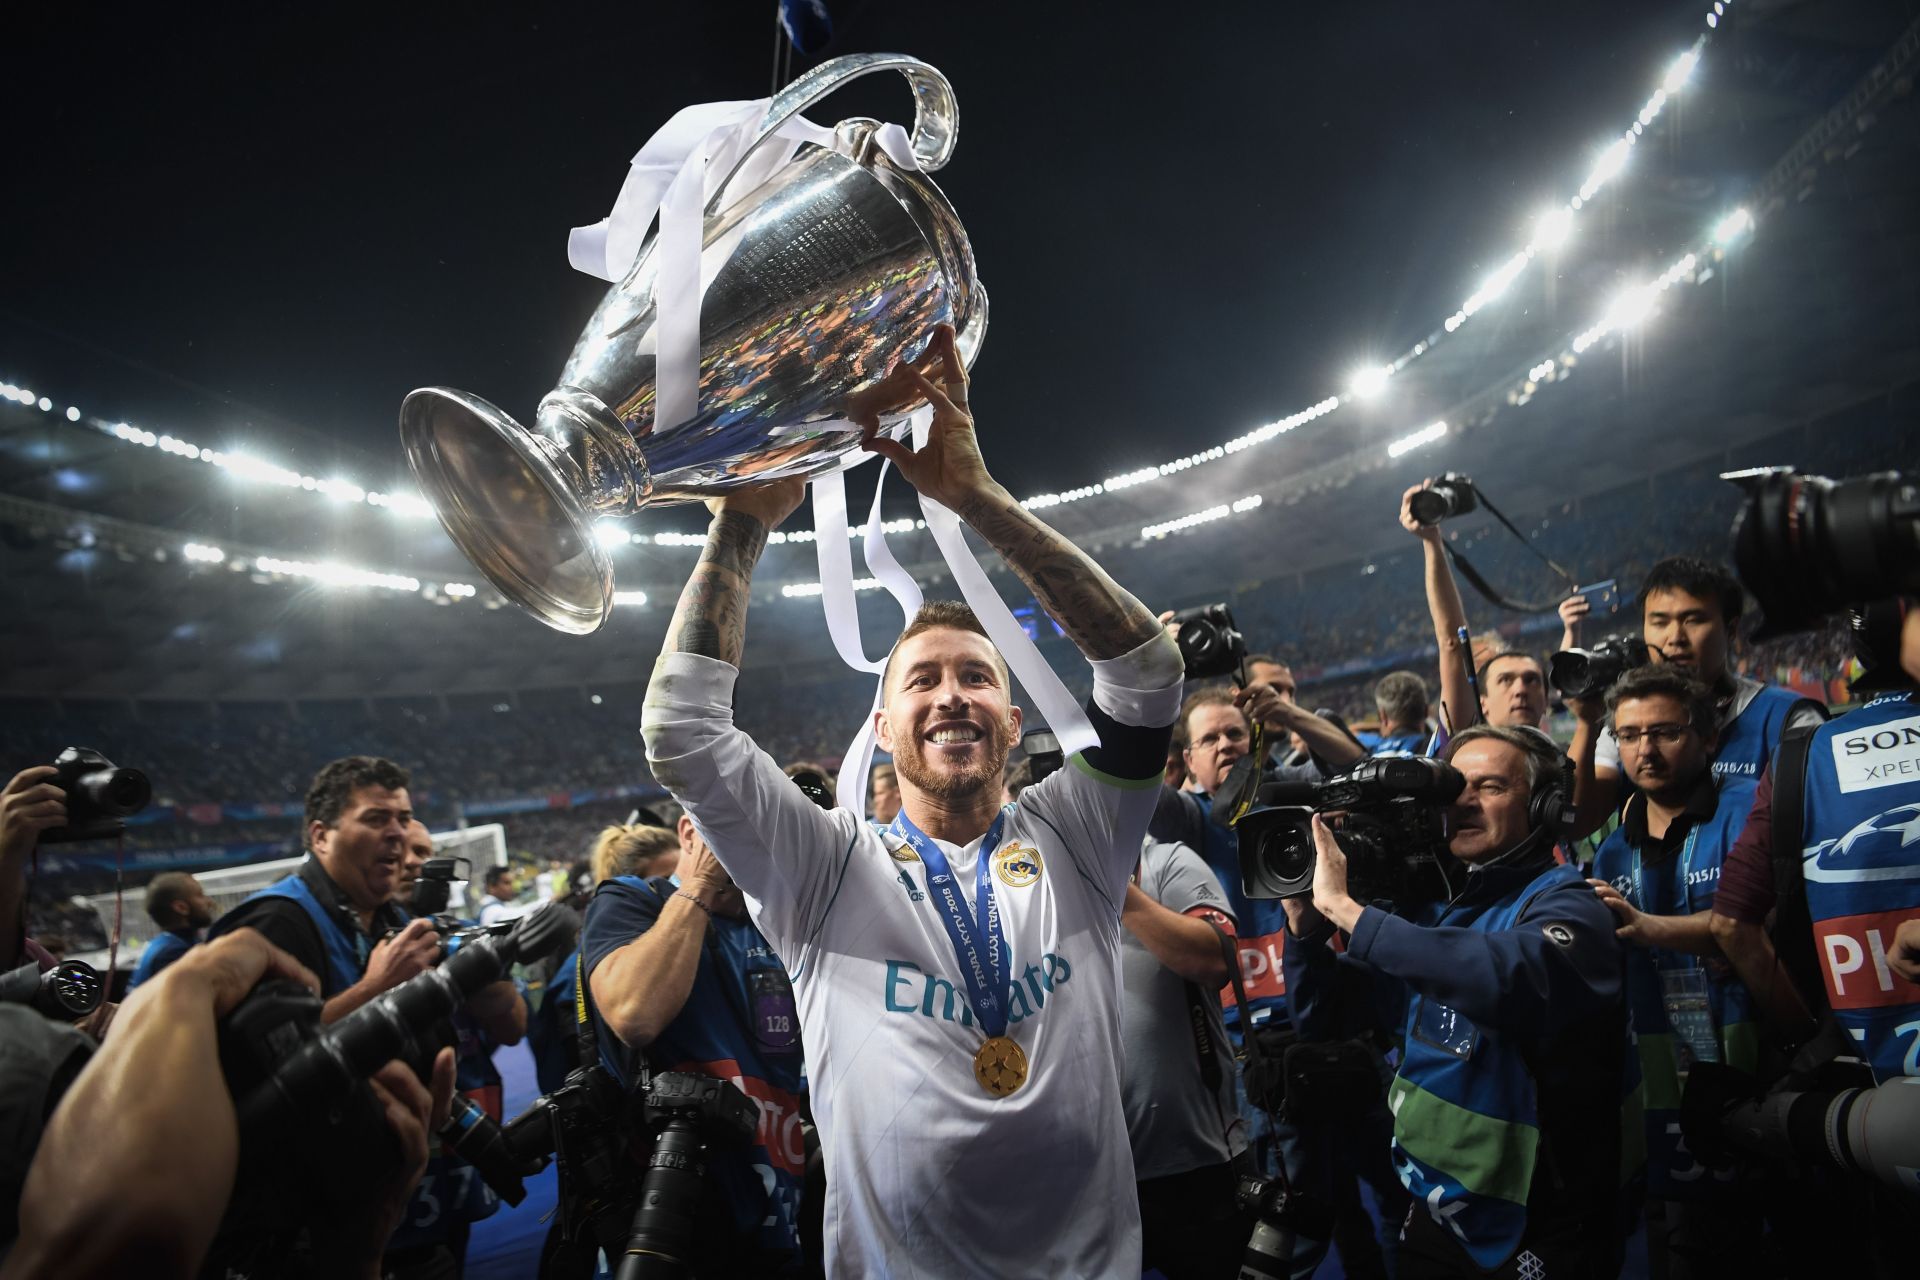 Sergio Ramos lifted four UEFA Champions League titles with Real Madrid.